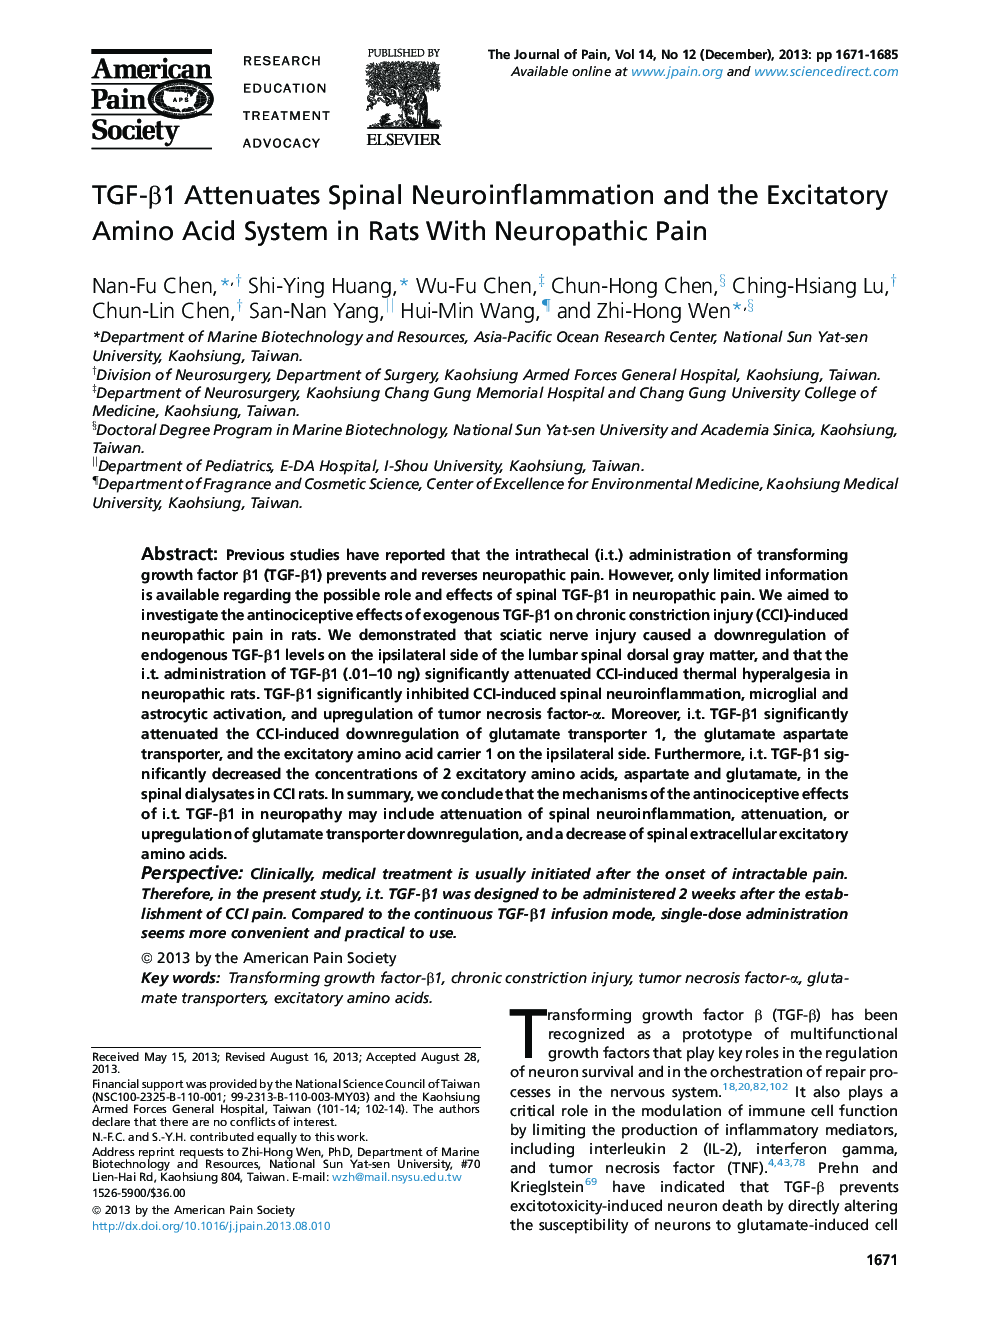 TGF-β1 Attenuates Spinal Neuroinflammation and the Excitatory Amino Acid System in Rats With Neuropathic Pain 